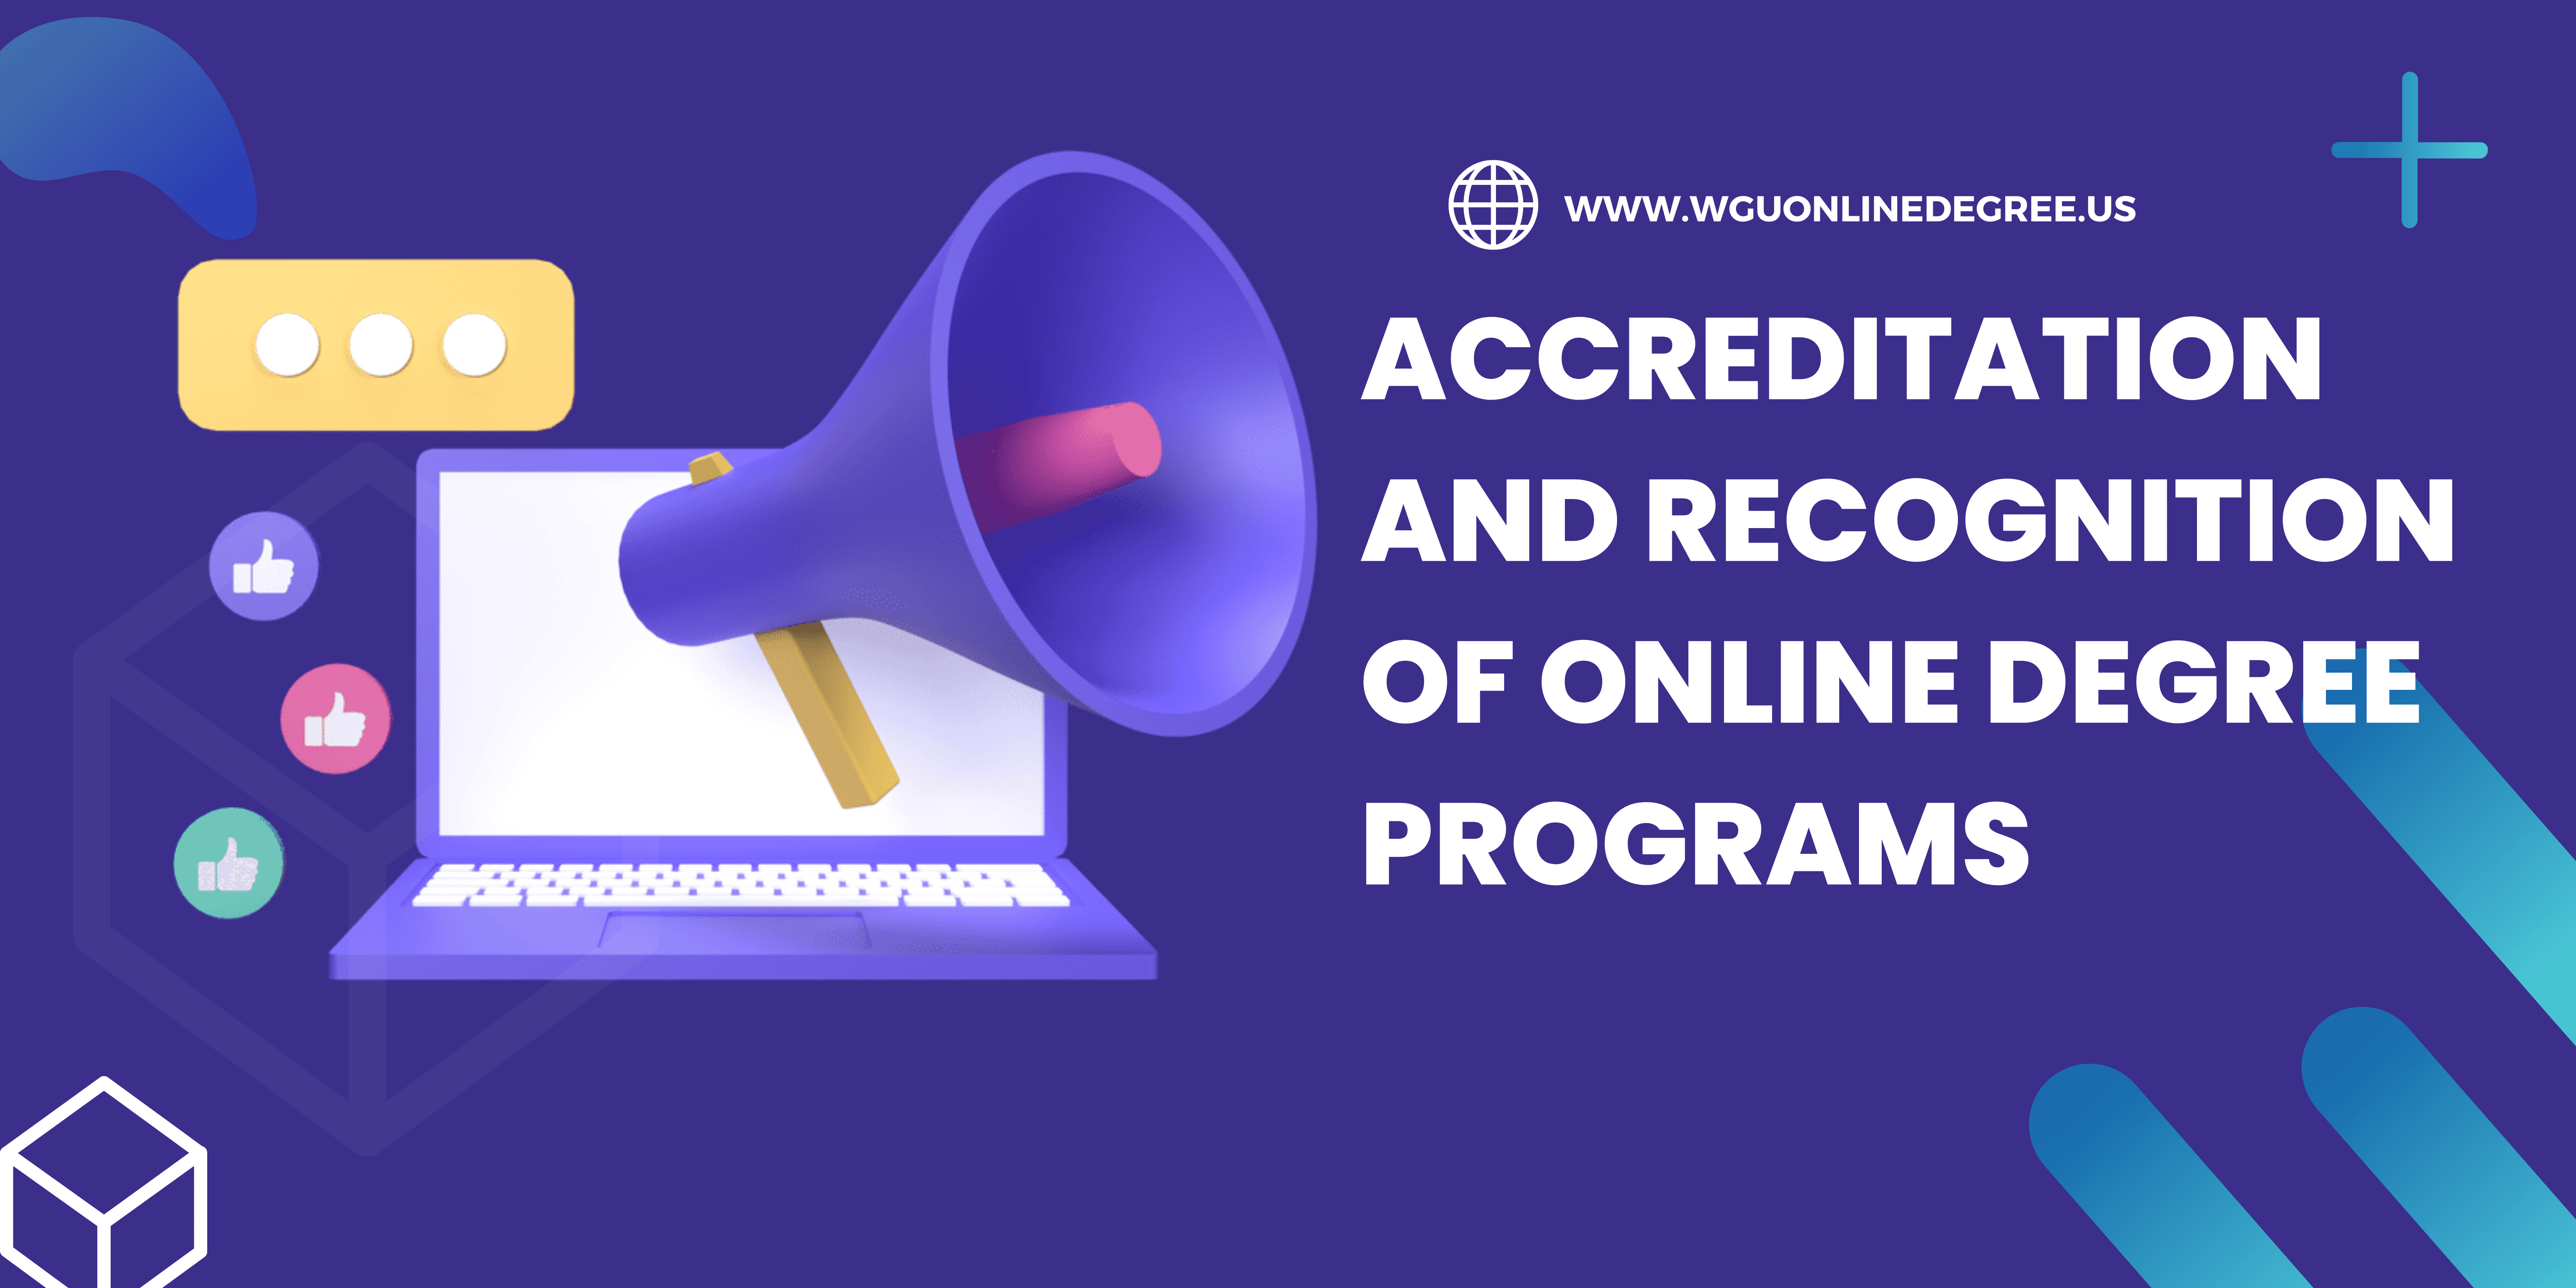 Accreditation and Recognition of Online Degree Programs | WGU Online Degree